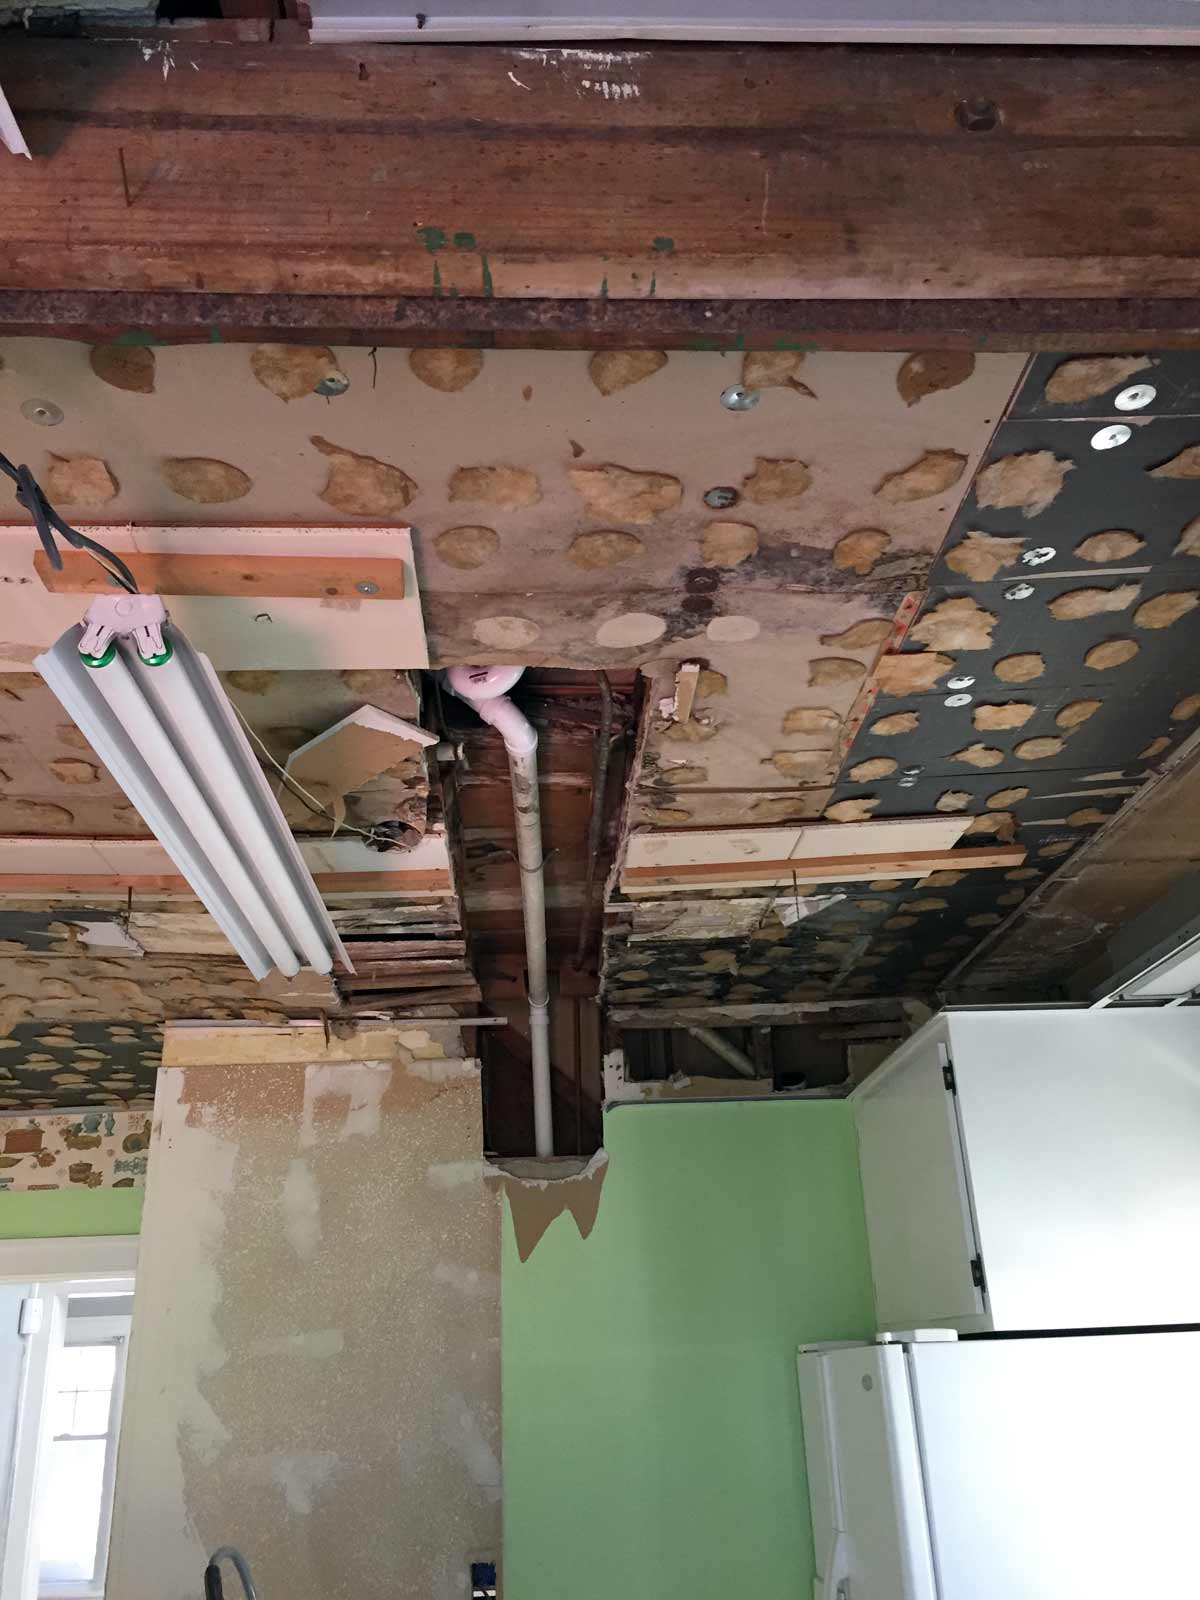 Fixing the old plumbing under a drop ceiling